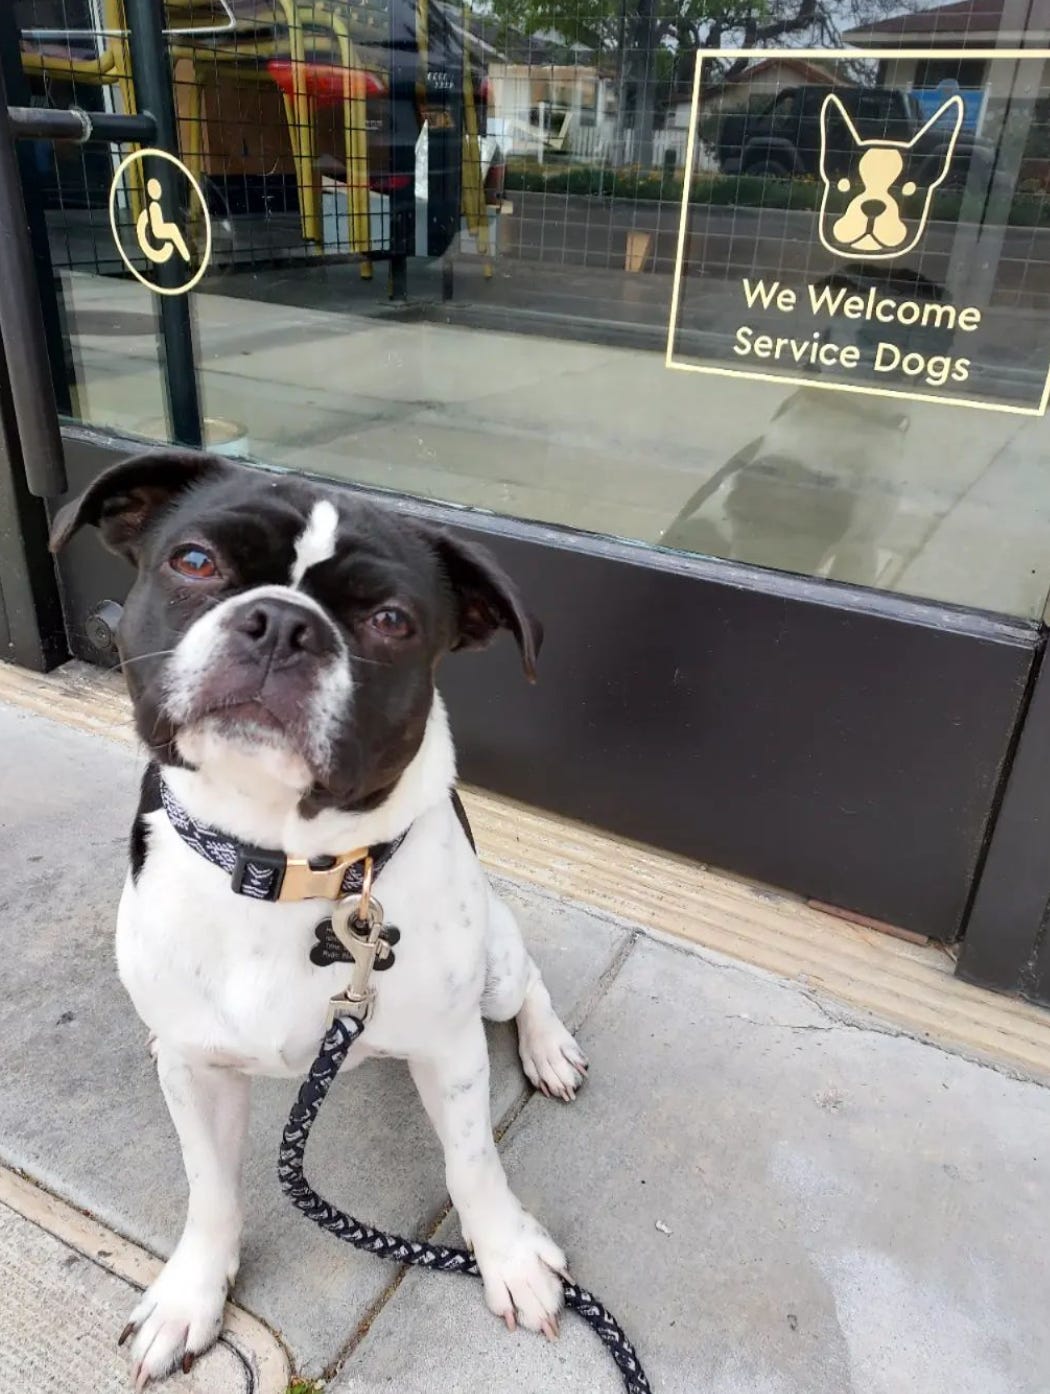 A small white and black terrier (dog) sits in front of a glass door at a restaurant with a decal welcoming service dogs and a dog icon that looks like him.